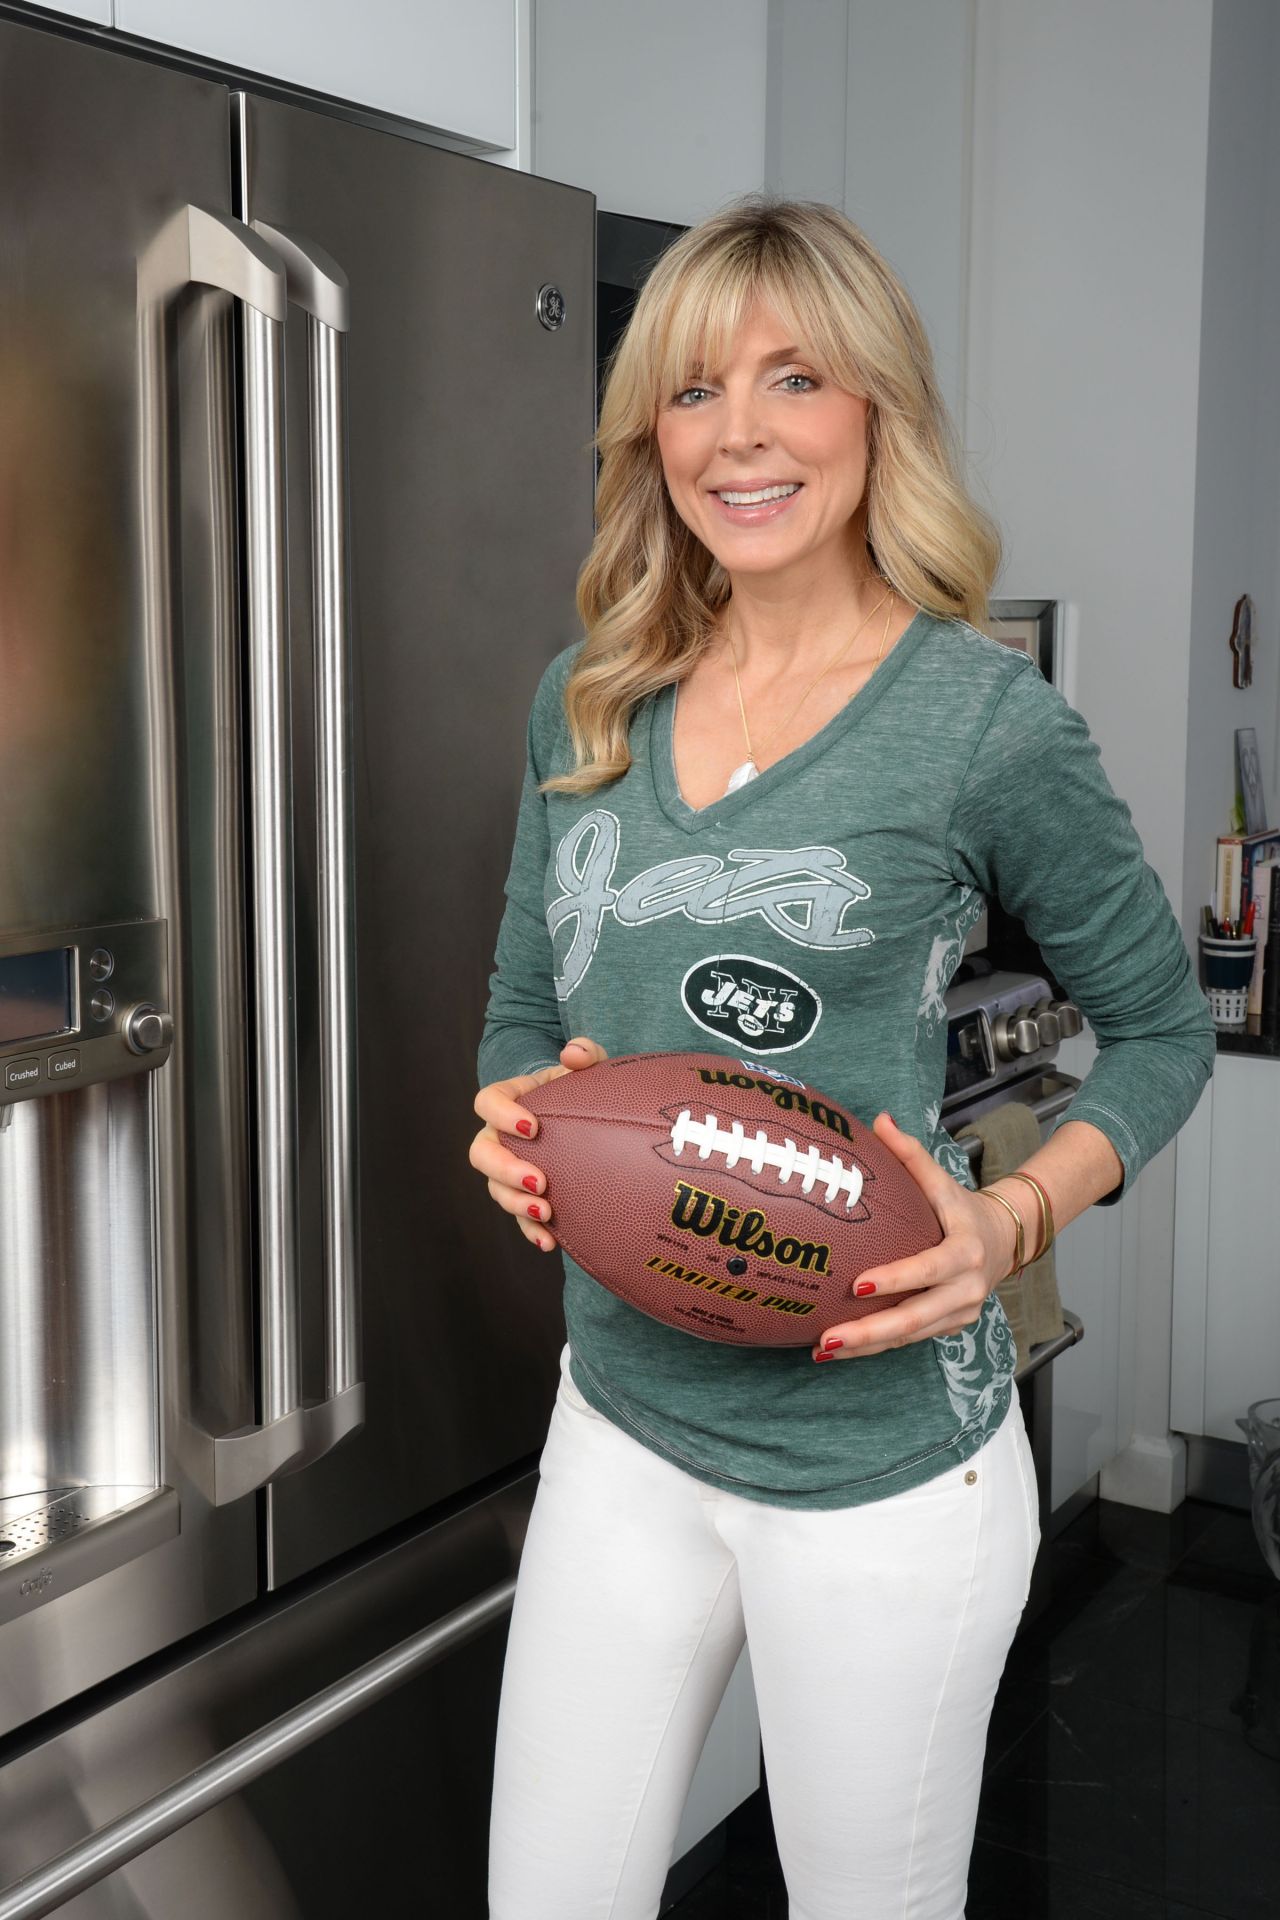 Marla Maples Getting Ready on Super Bowl Sunday